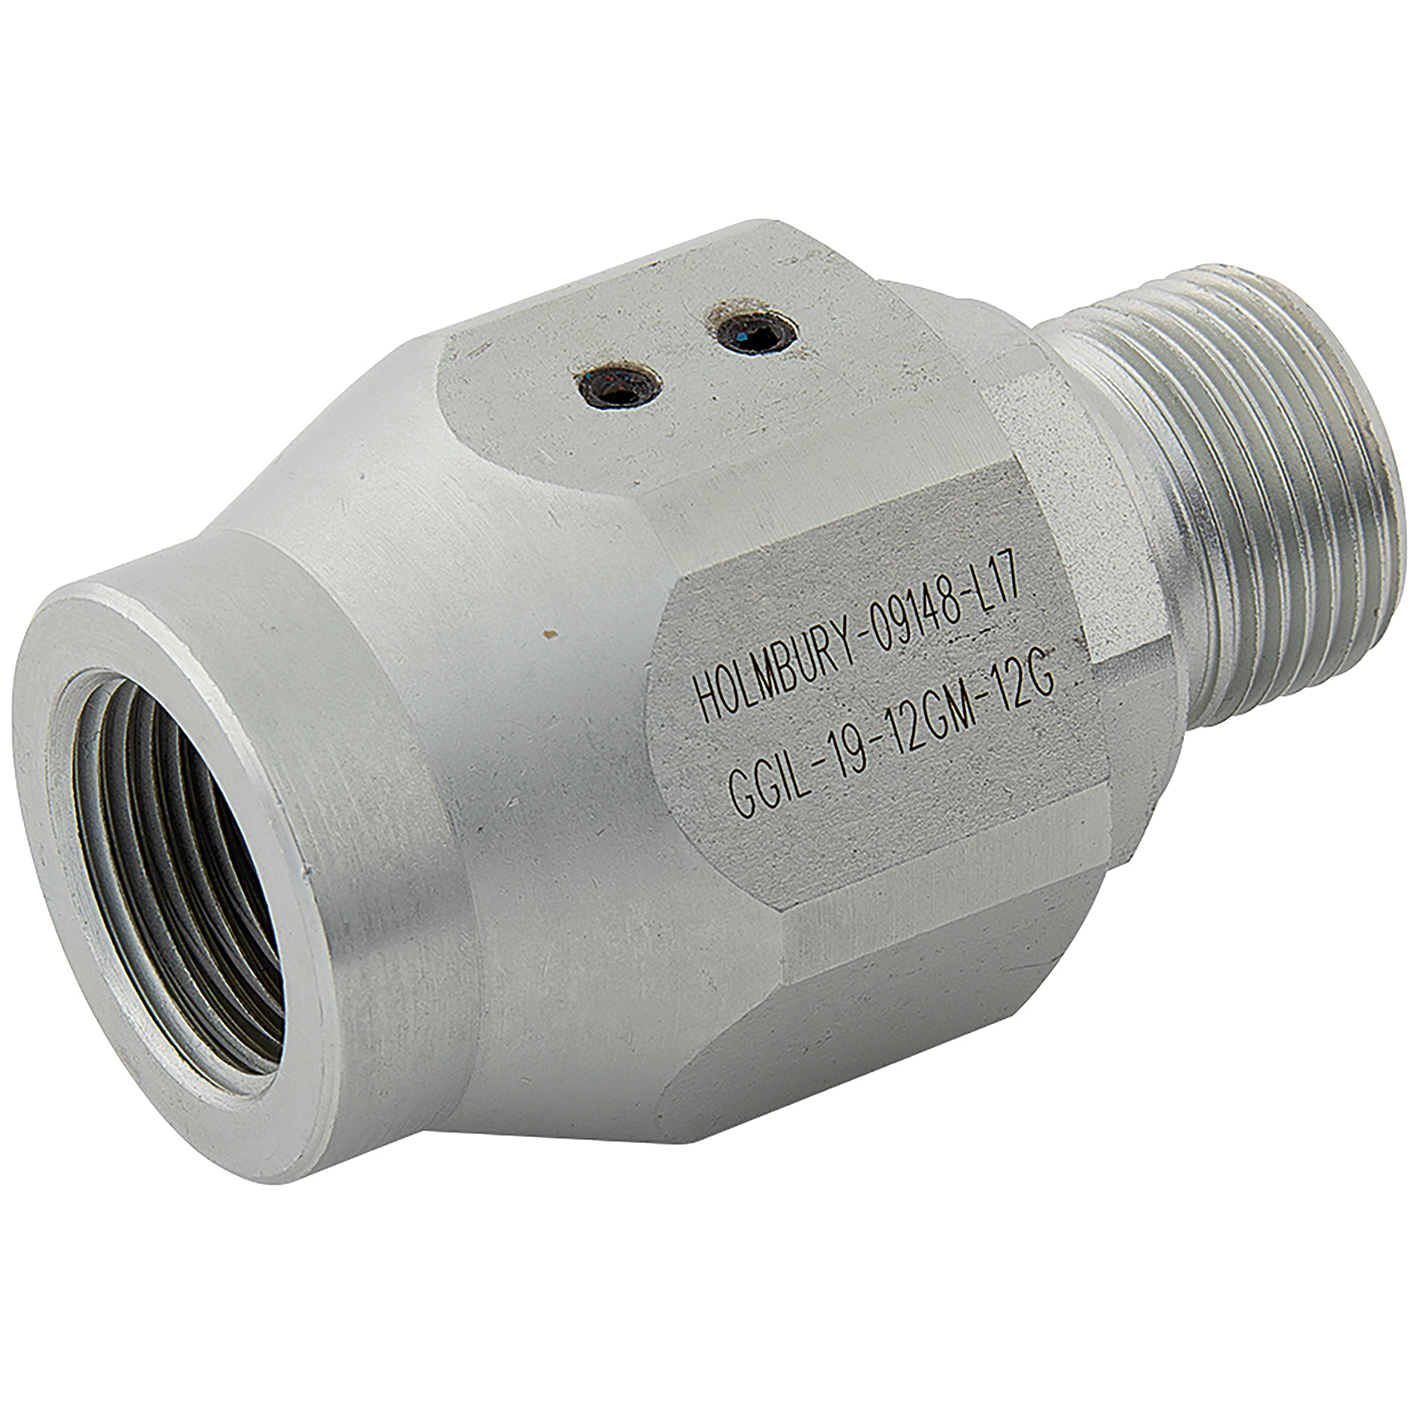 1/4" BSPP Rotary In-Line Coupling